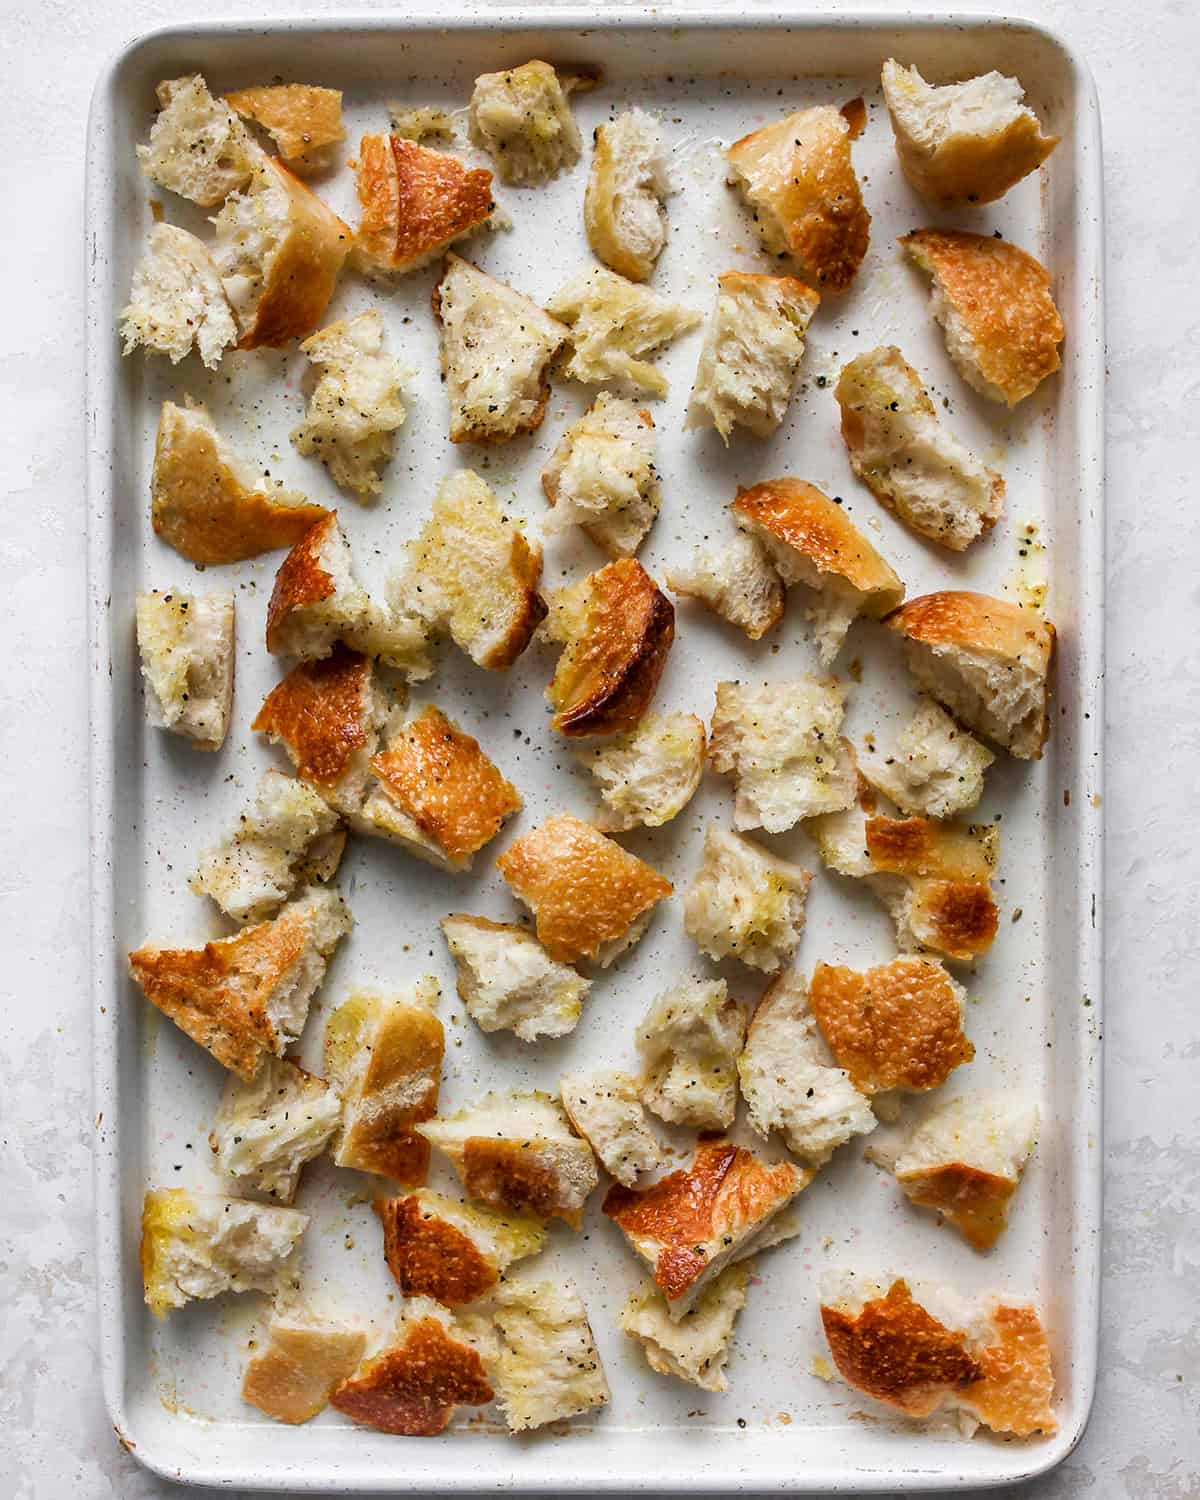 bread on a baking sheet before toasting to use in this panzanella salad recipe